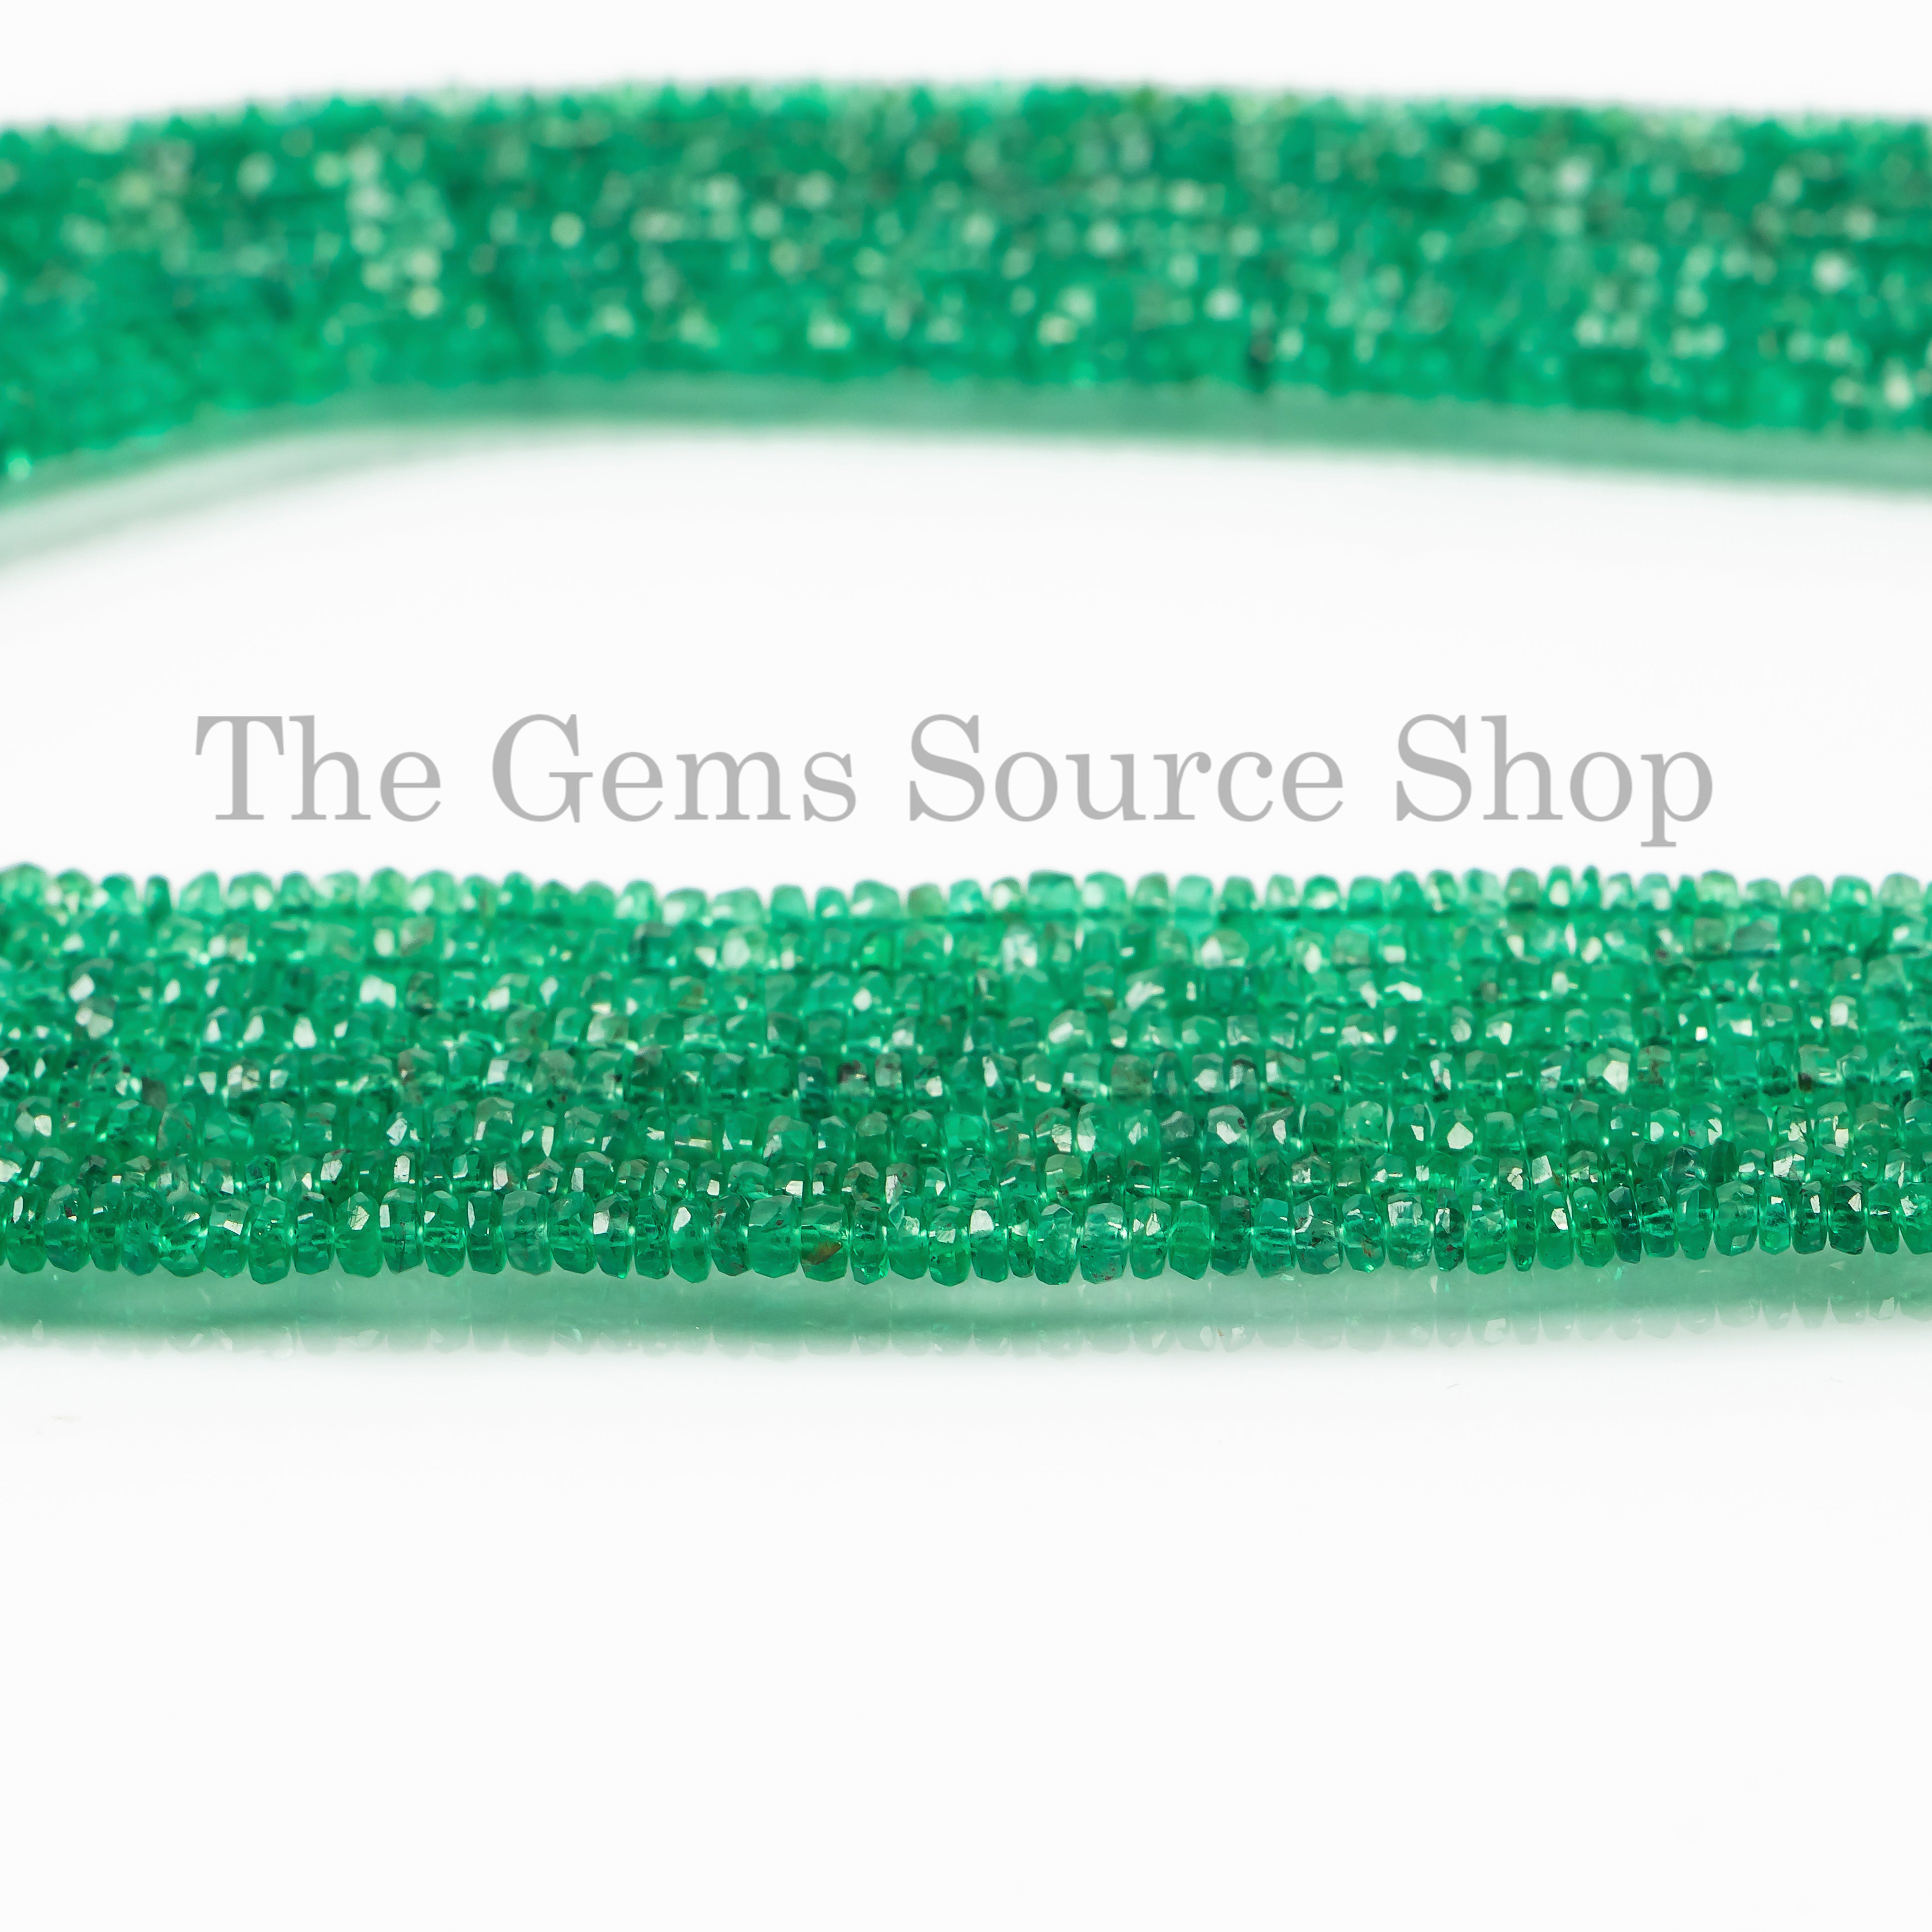 Natural Zambian Emerald Faceted Rondelle Beaded Necklace For Party tgs-4612